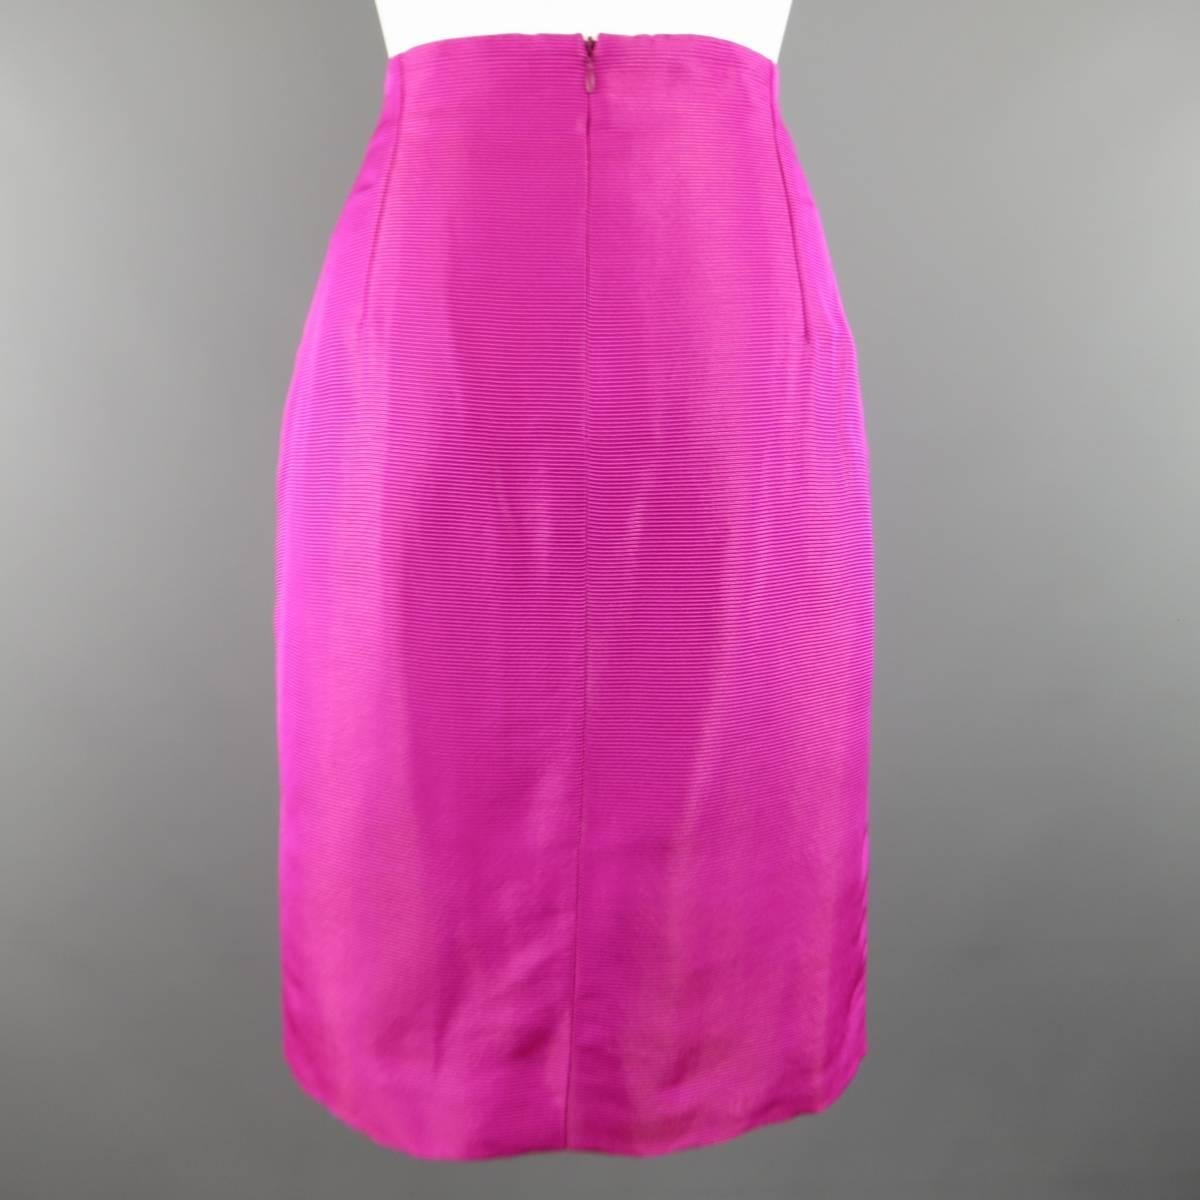 Vintage 1980's GIANNI VERSACE Couture pencil skirt in a brilliant fuchsia pink fabric with sparkly metallic stripes. Small discoloration at back of hem. Made in Italy.
 
Good Pre-Owned Condition.
Marked: 44 / 10
 
Measurements:
 
Waist: 29 in.
Hip: